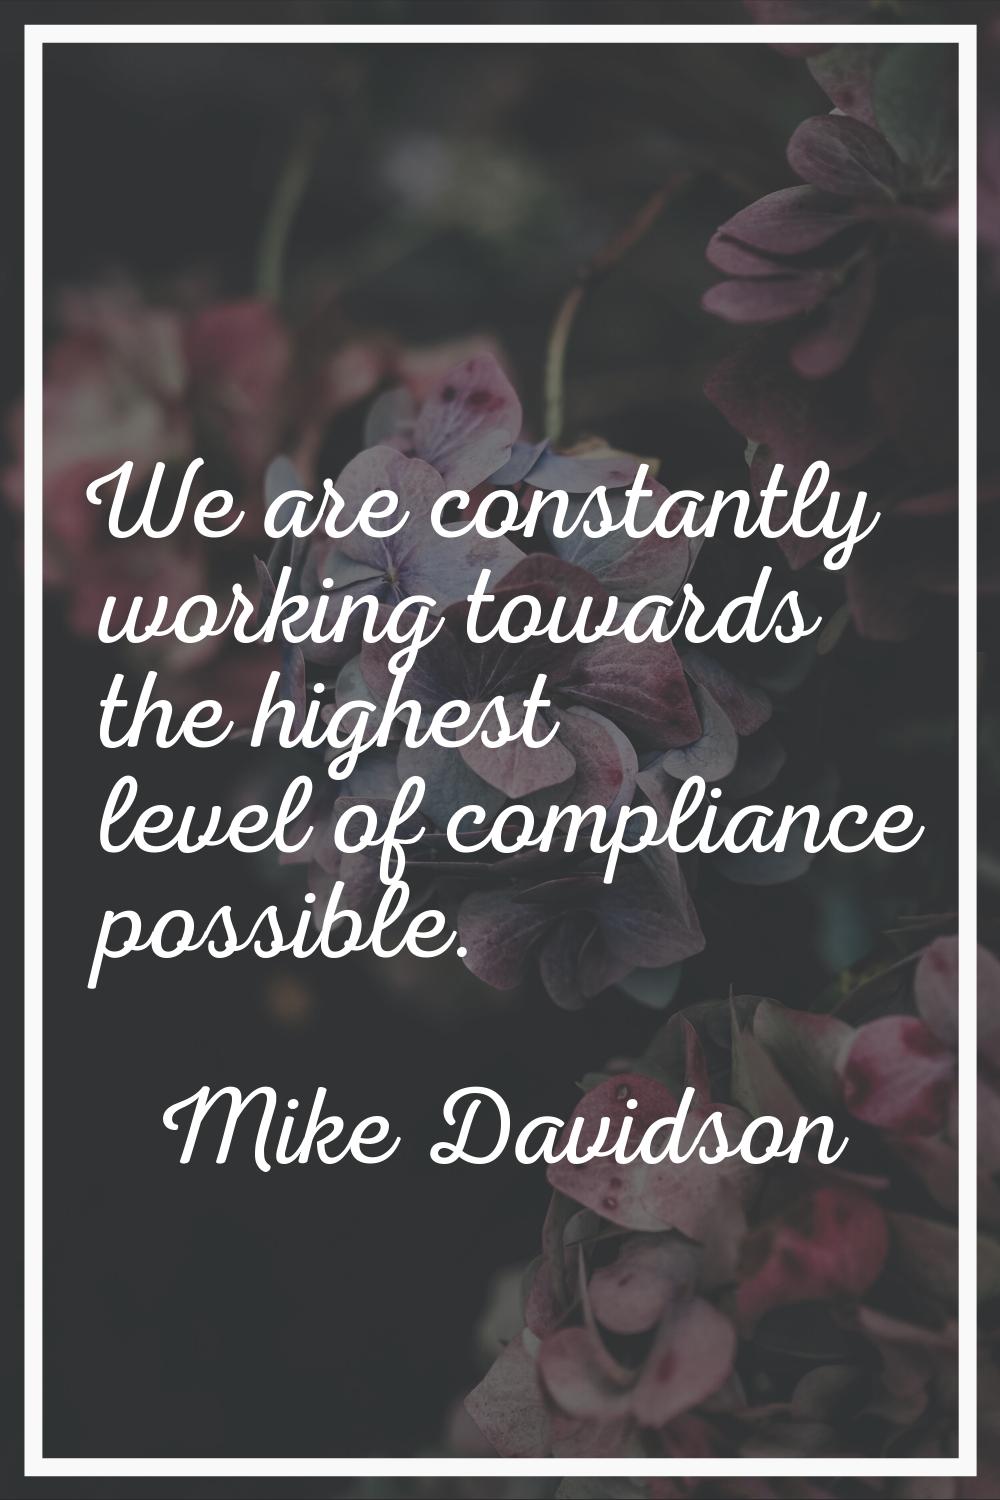 We are constantly working towards the highest level of compliance possible.